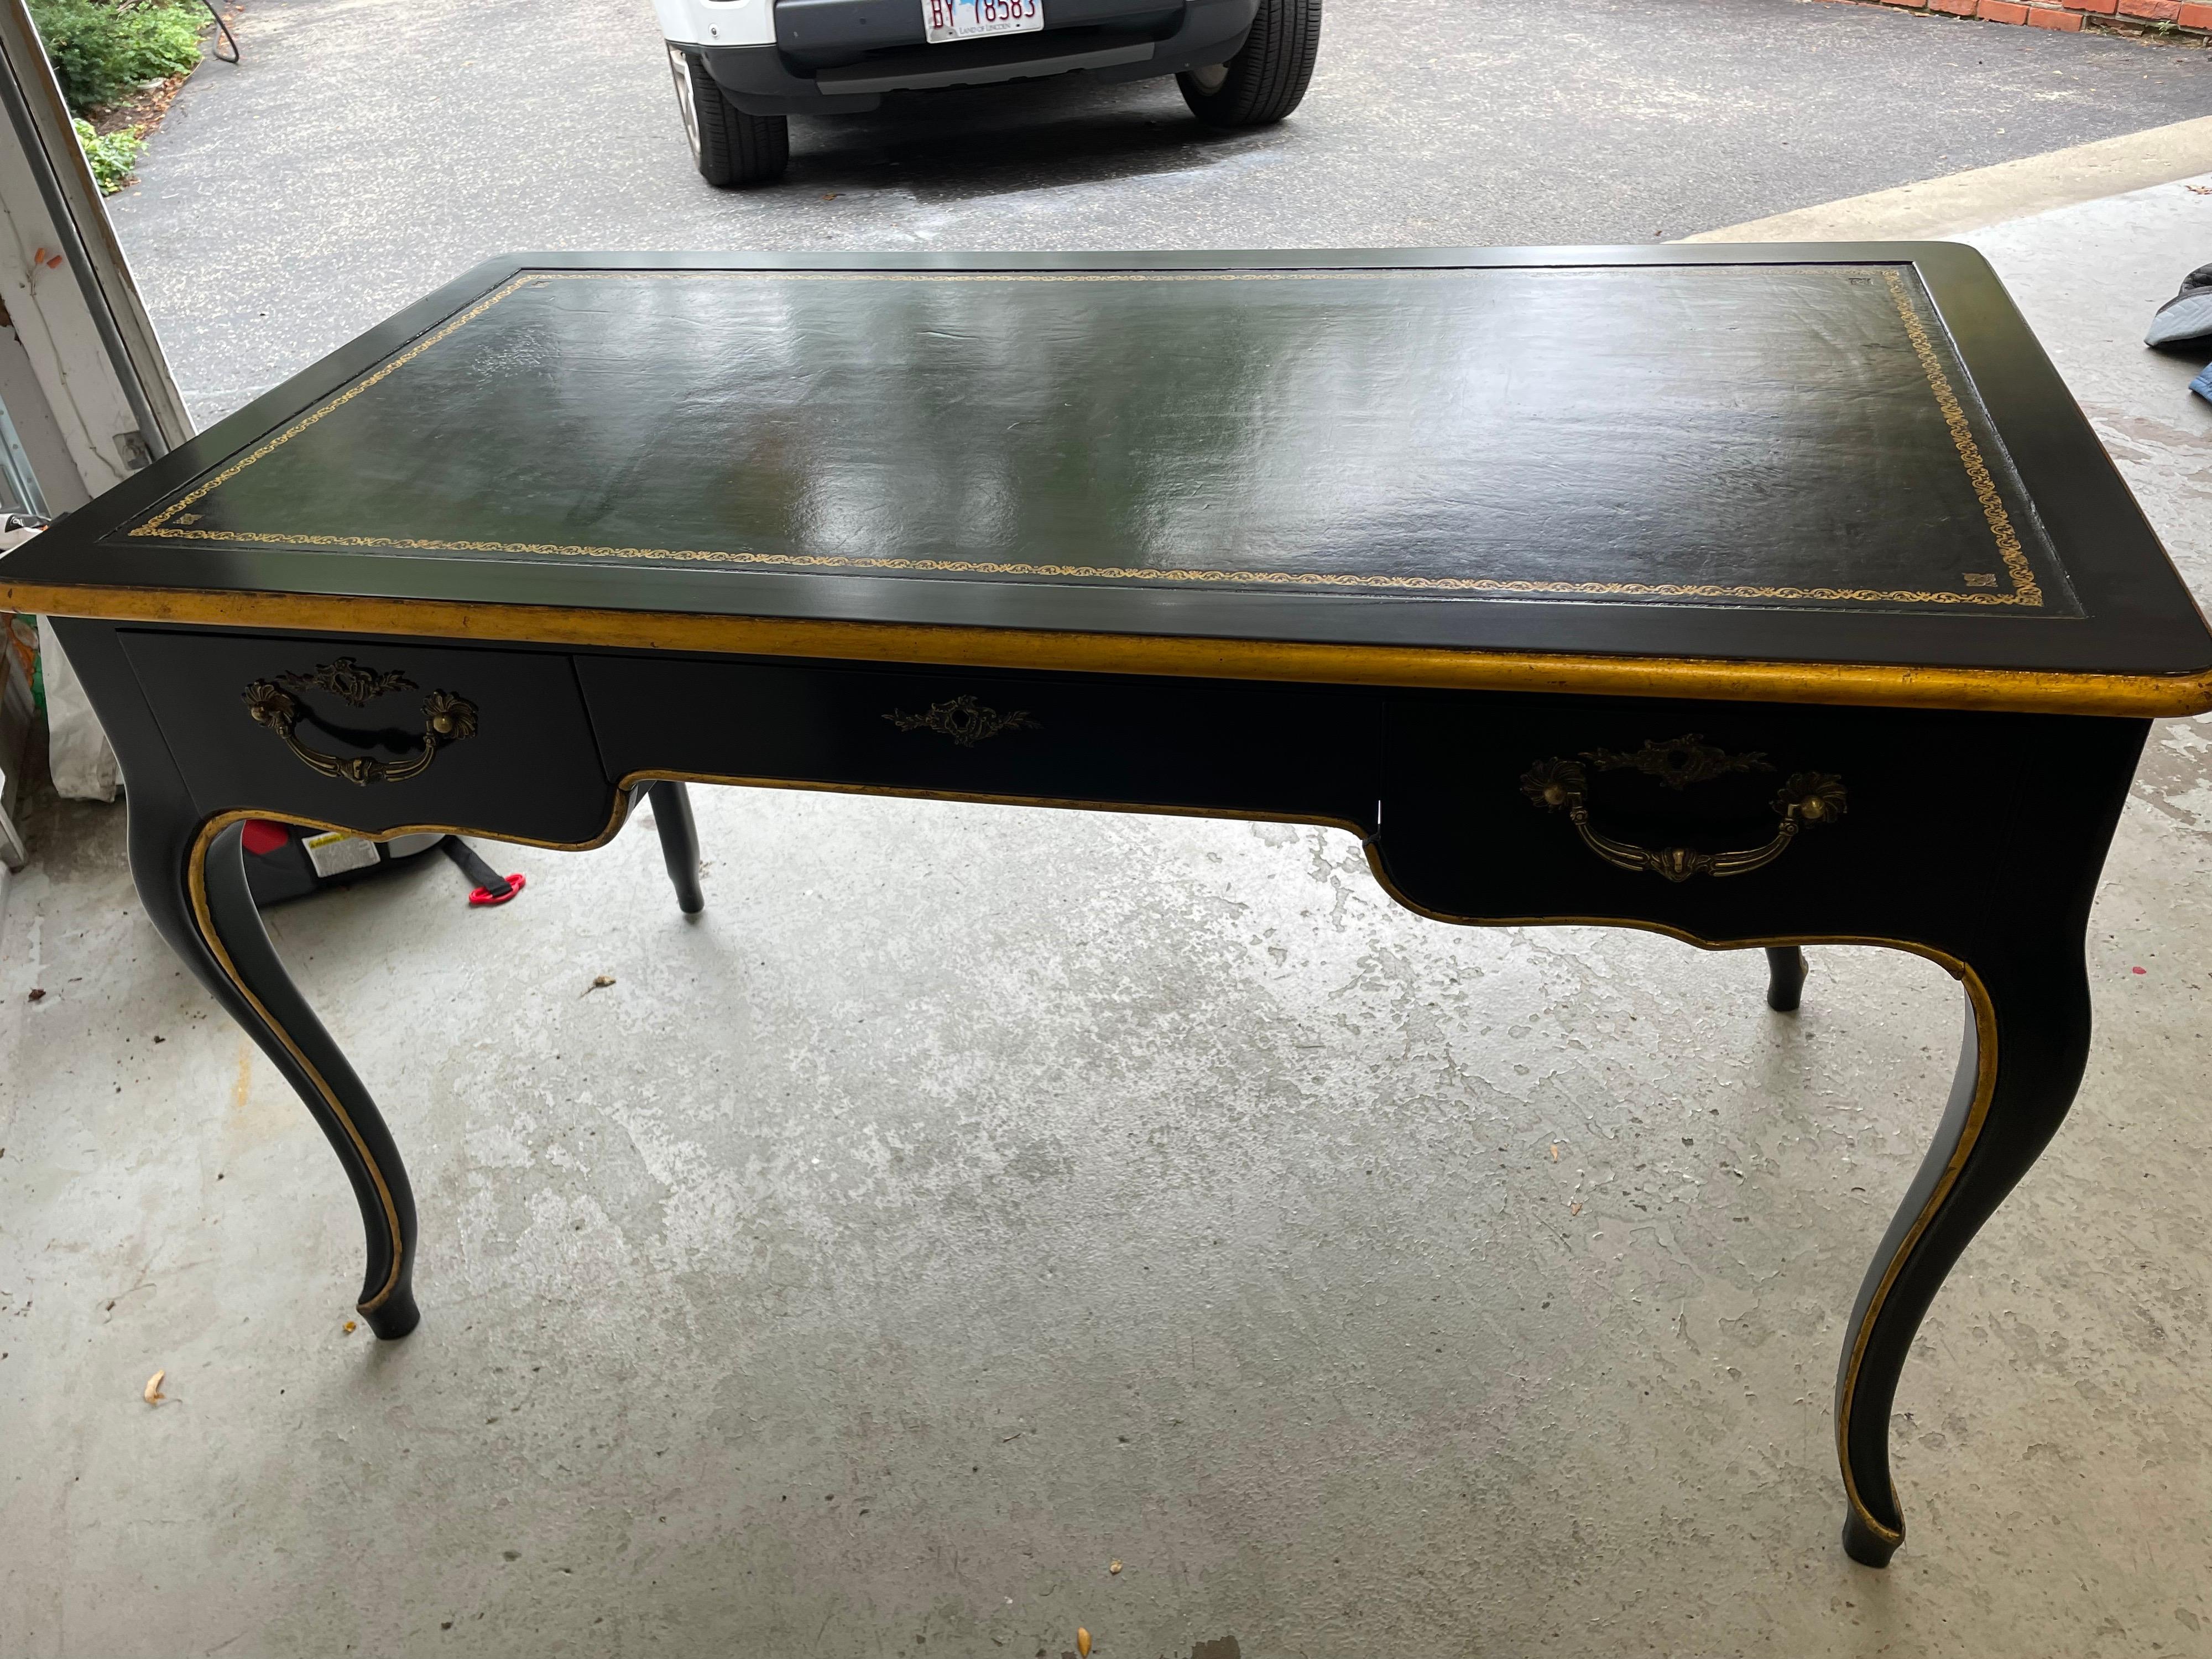 This is a wonderful French style Black laquer and gold trim writing desk, with an inset of black embossed leather.